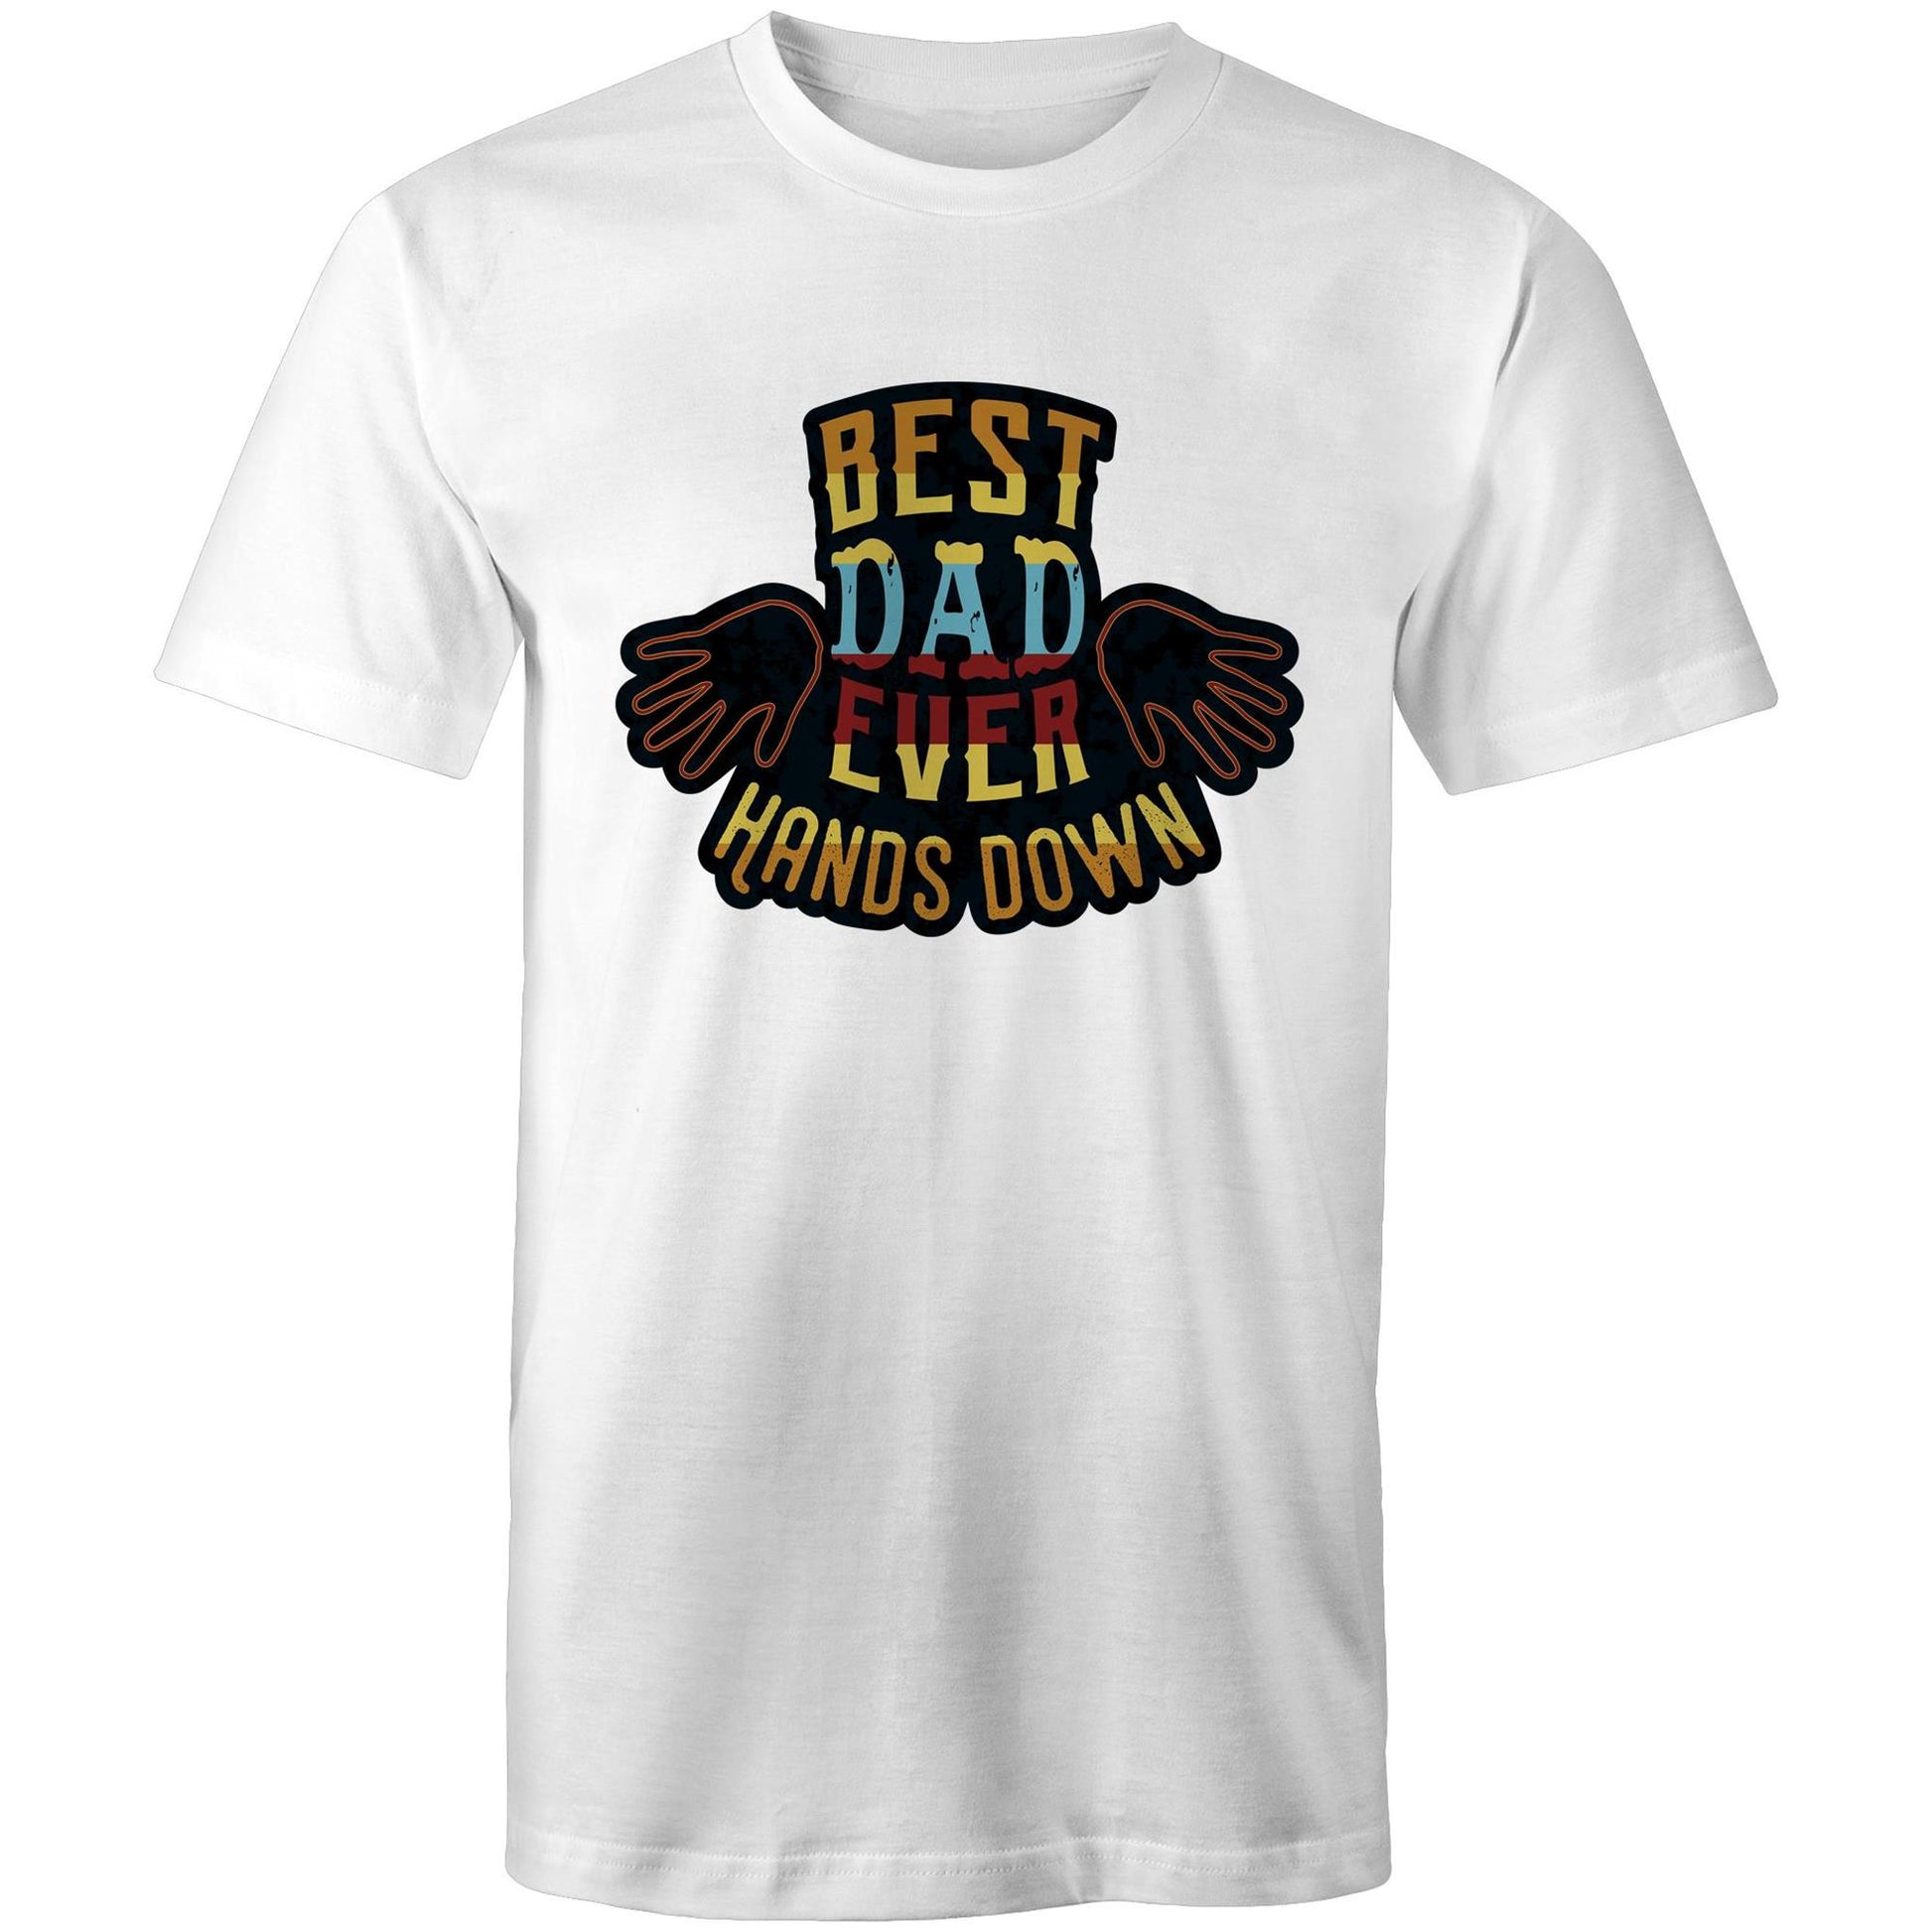 Best Dad Ever, Hands Down - Mens T-Shirt White Mens T-shirt Dad